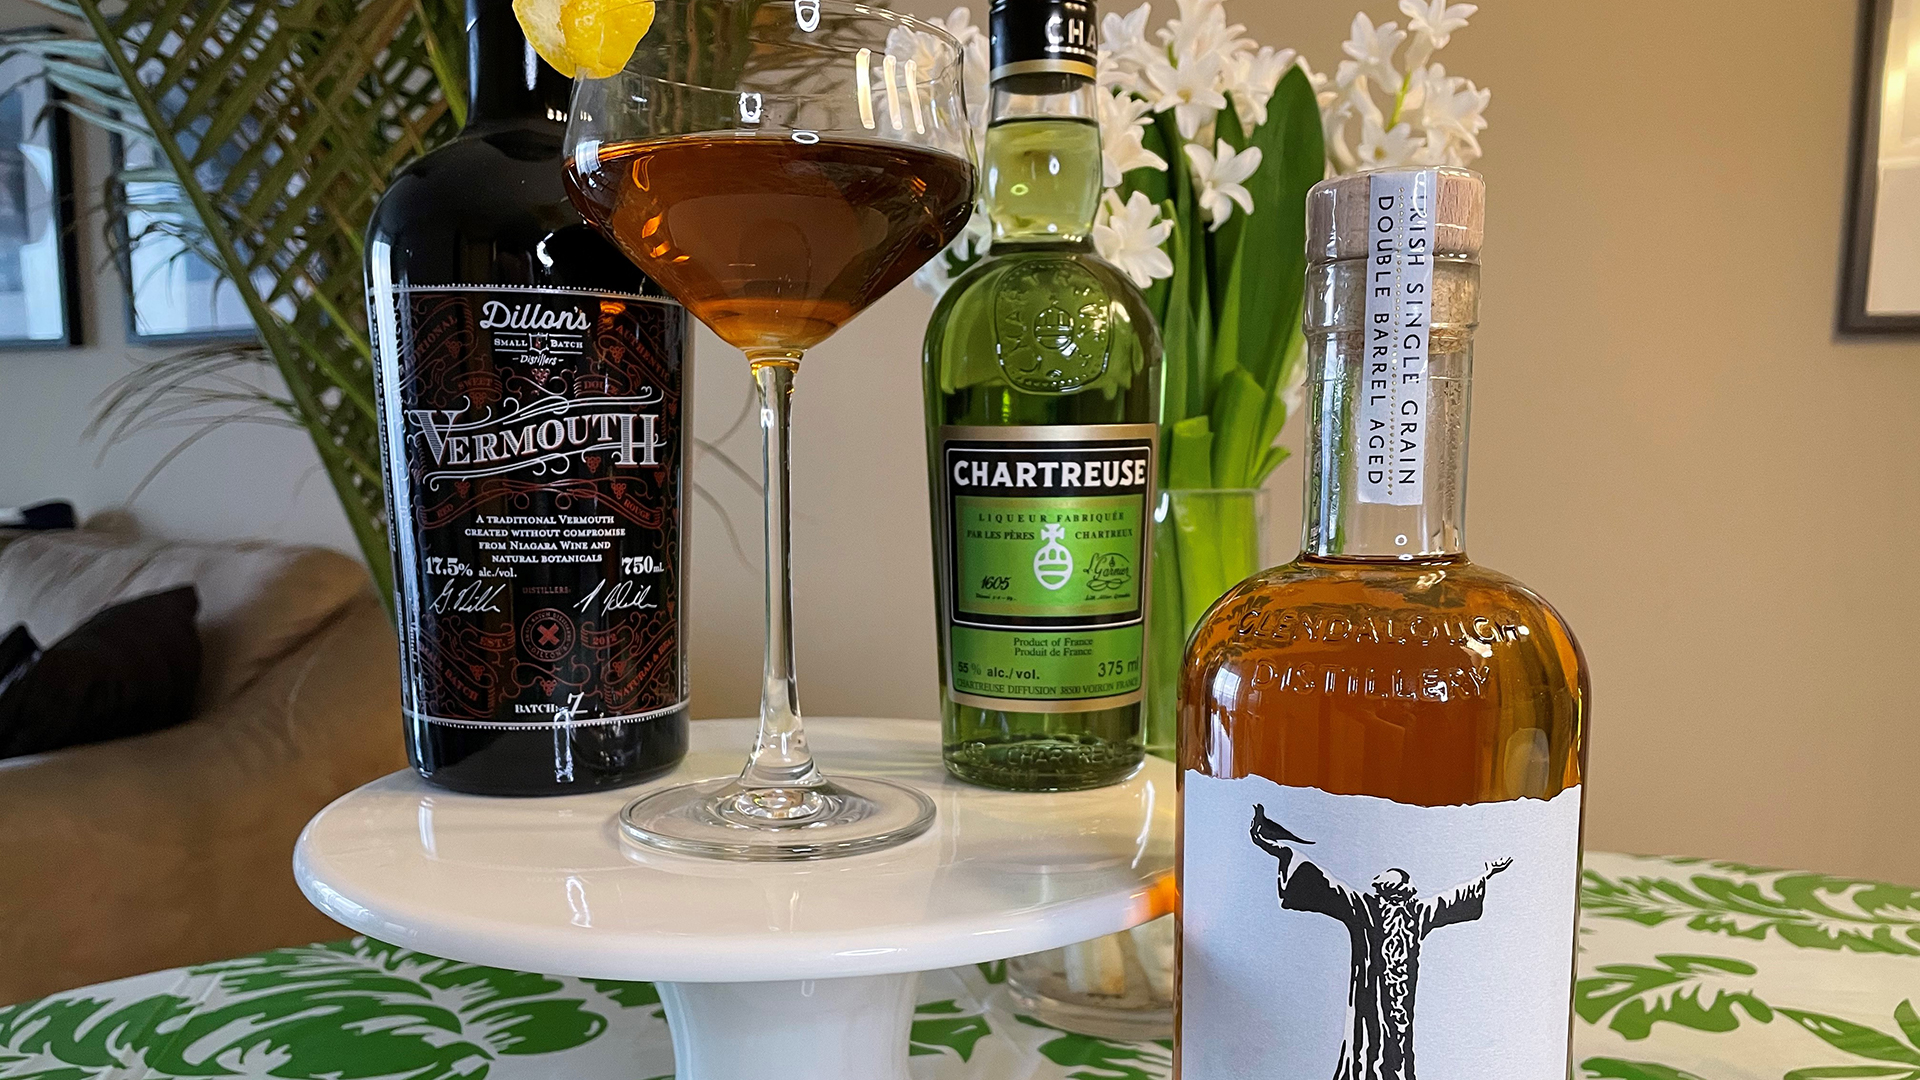 Tipperary cocktail